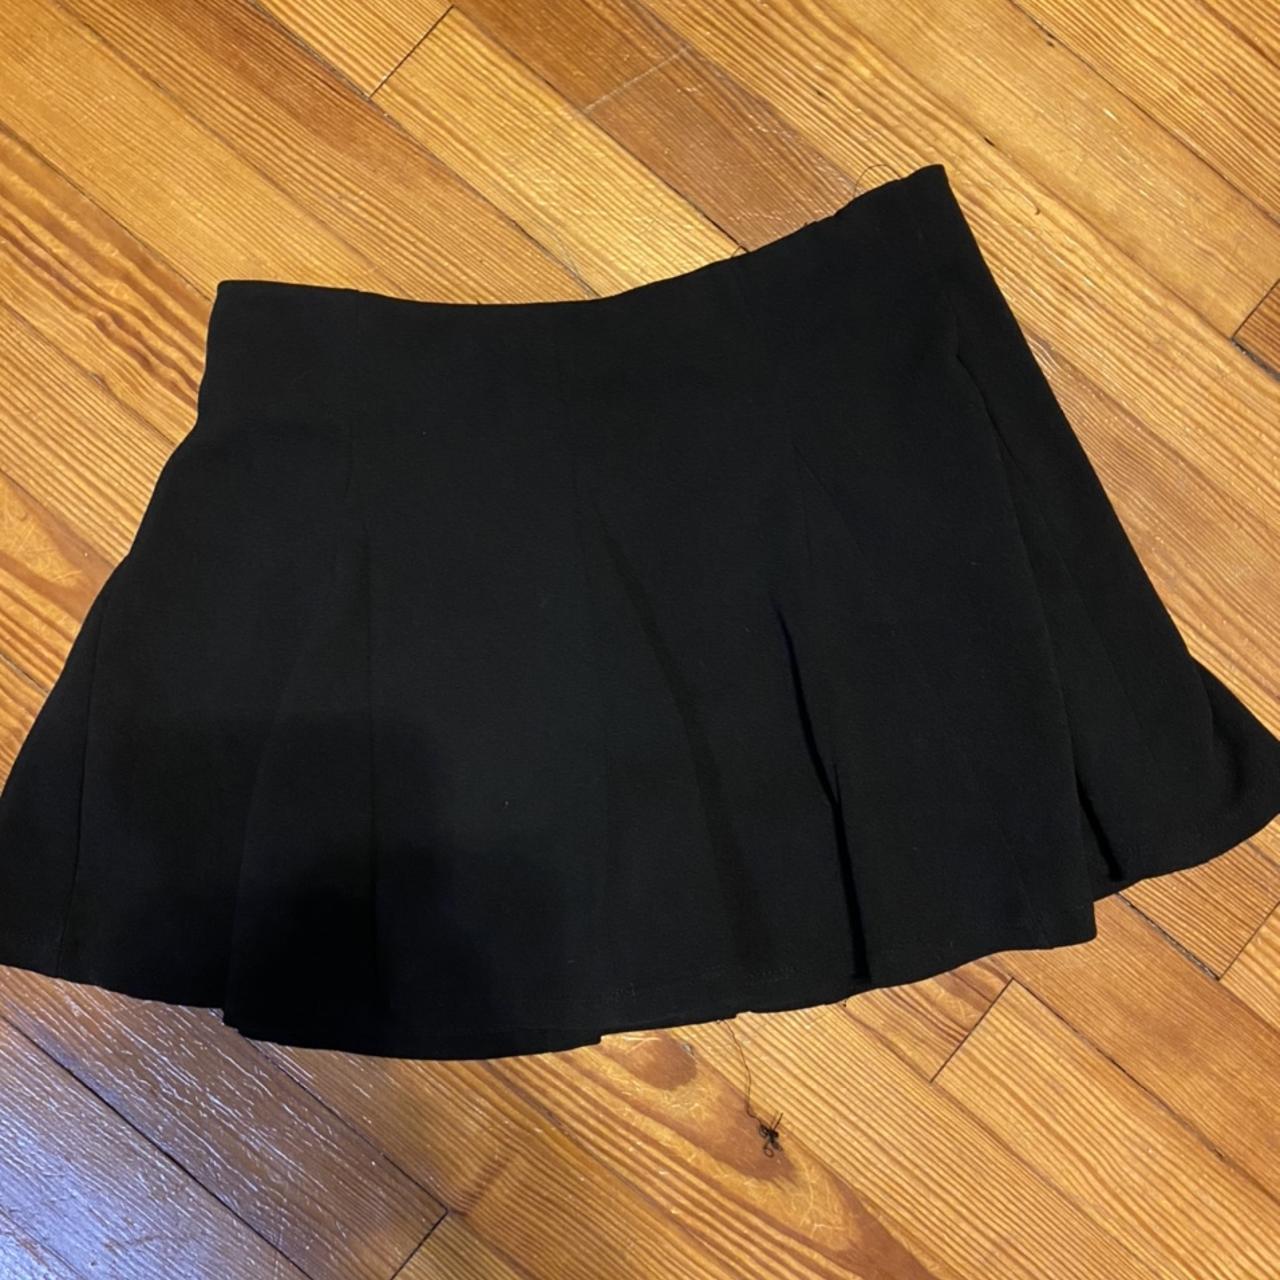 Cute black pleated skirt with built in shorts... - Depop